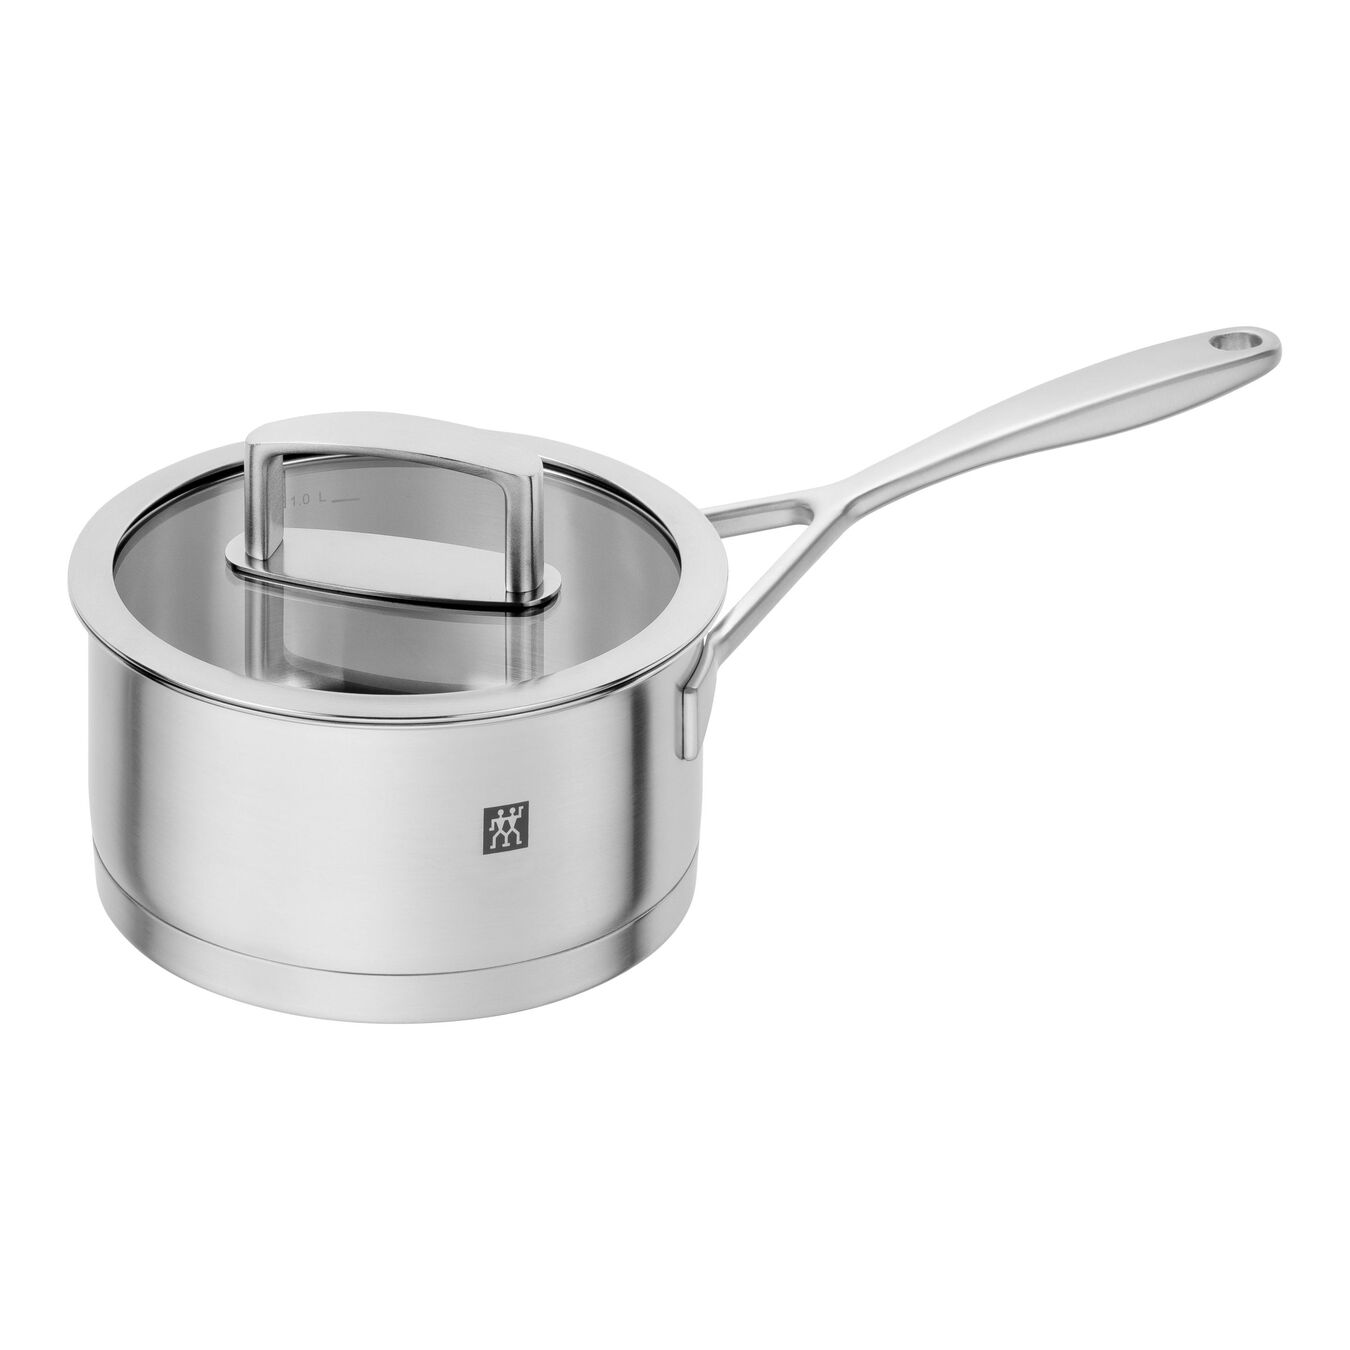 16 cm 18/10 Stainless Steel Saucepan silver,,large 1